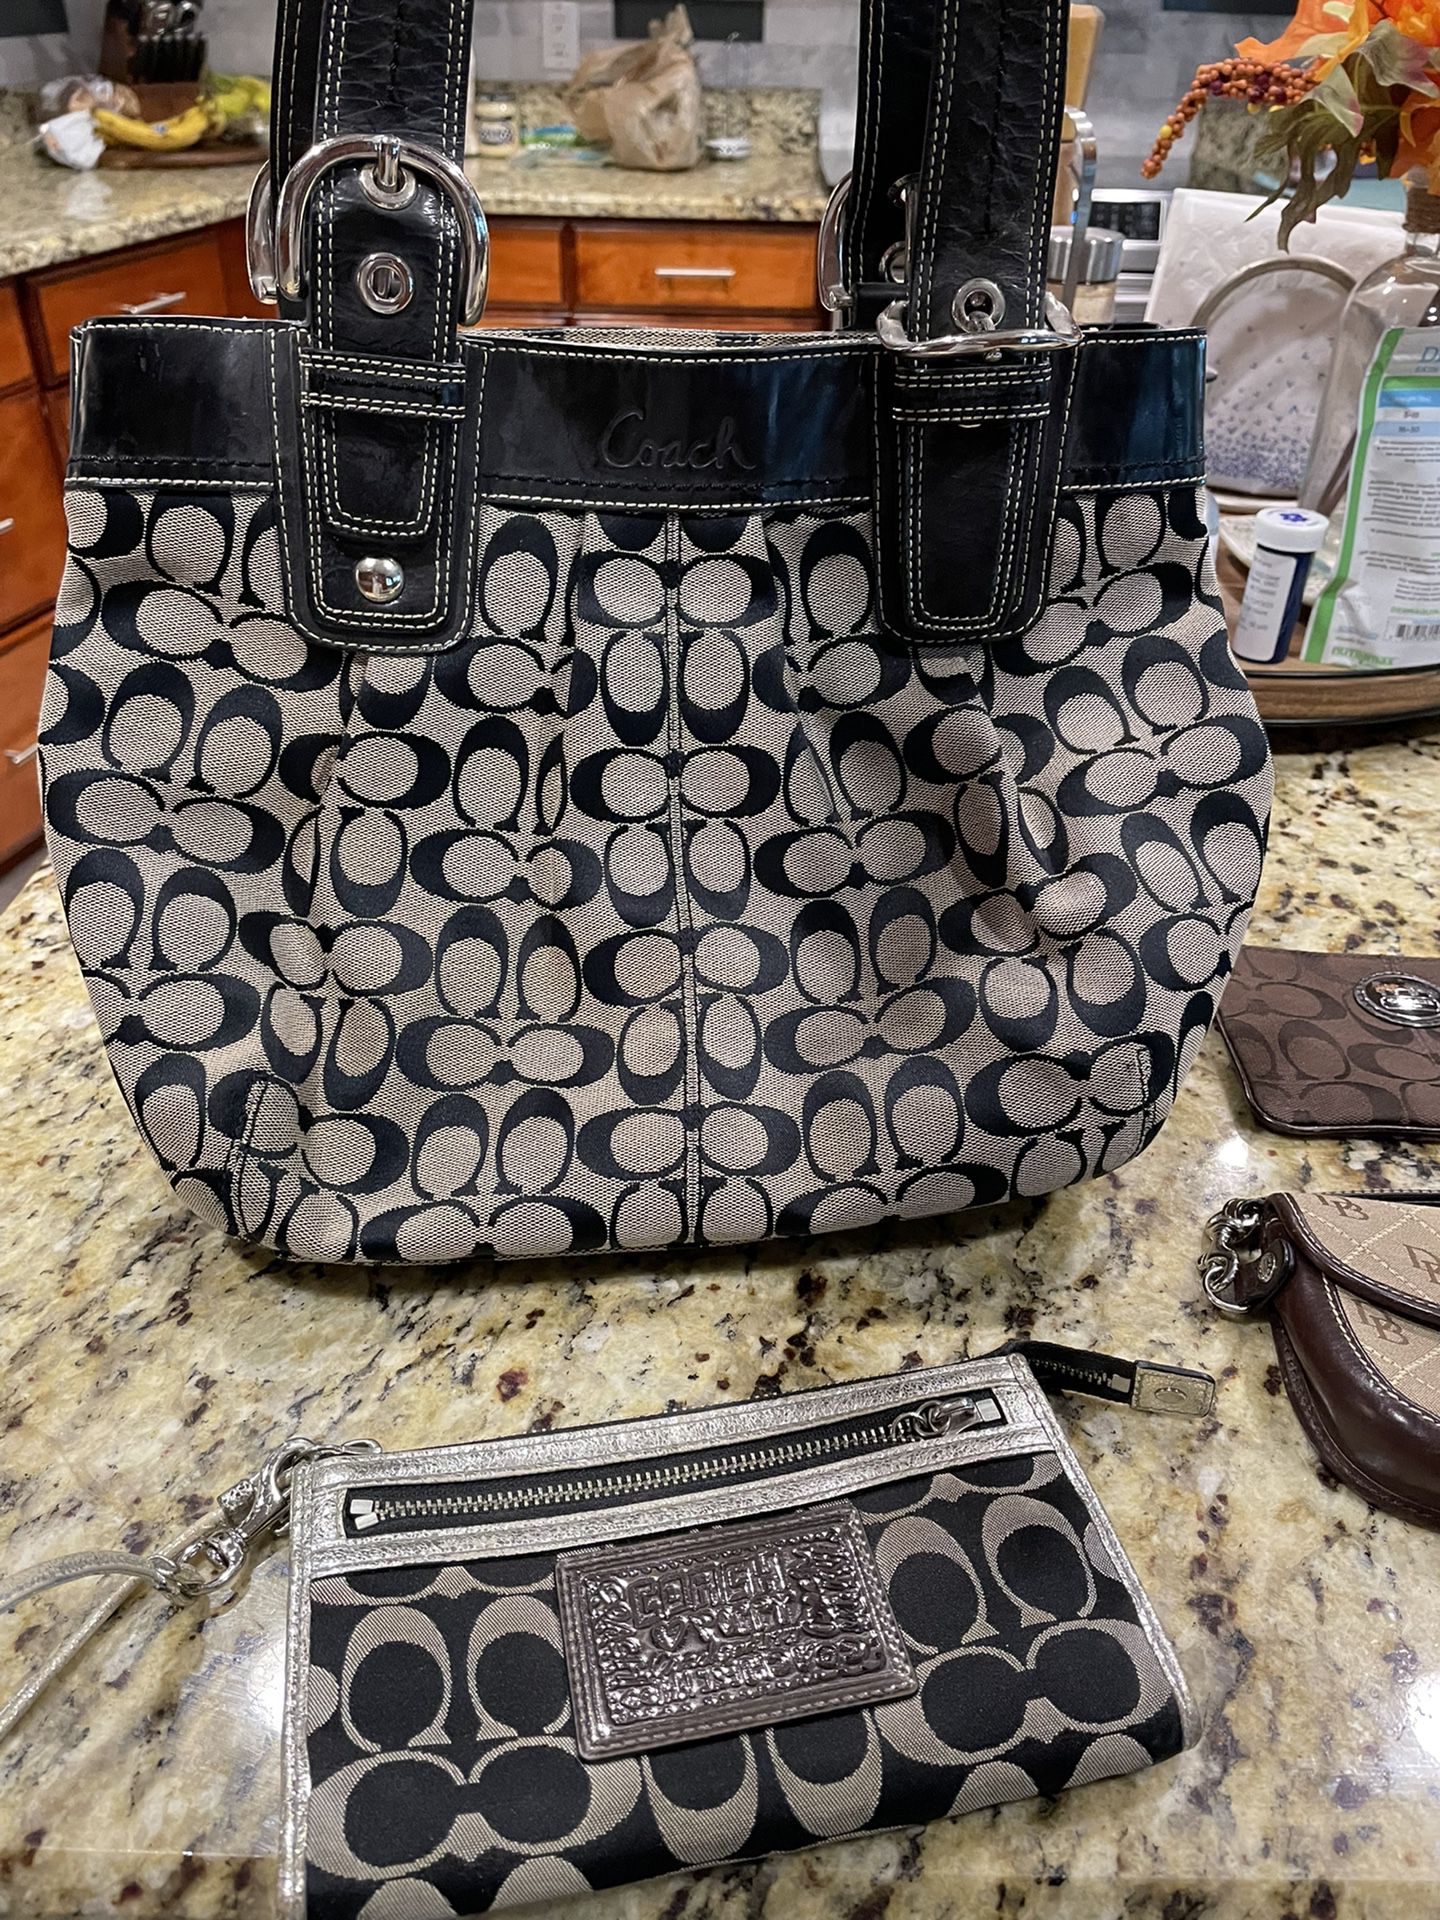 Authentic Coach Hobo Bag And Wristlet 